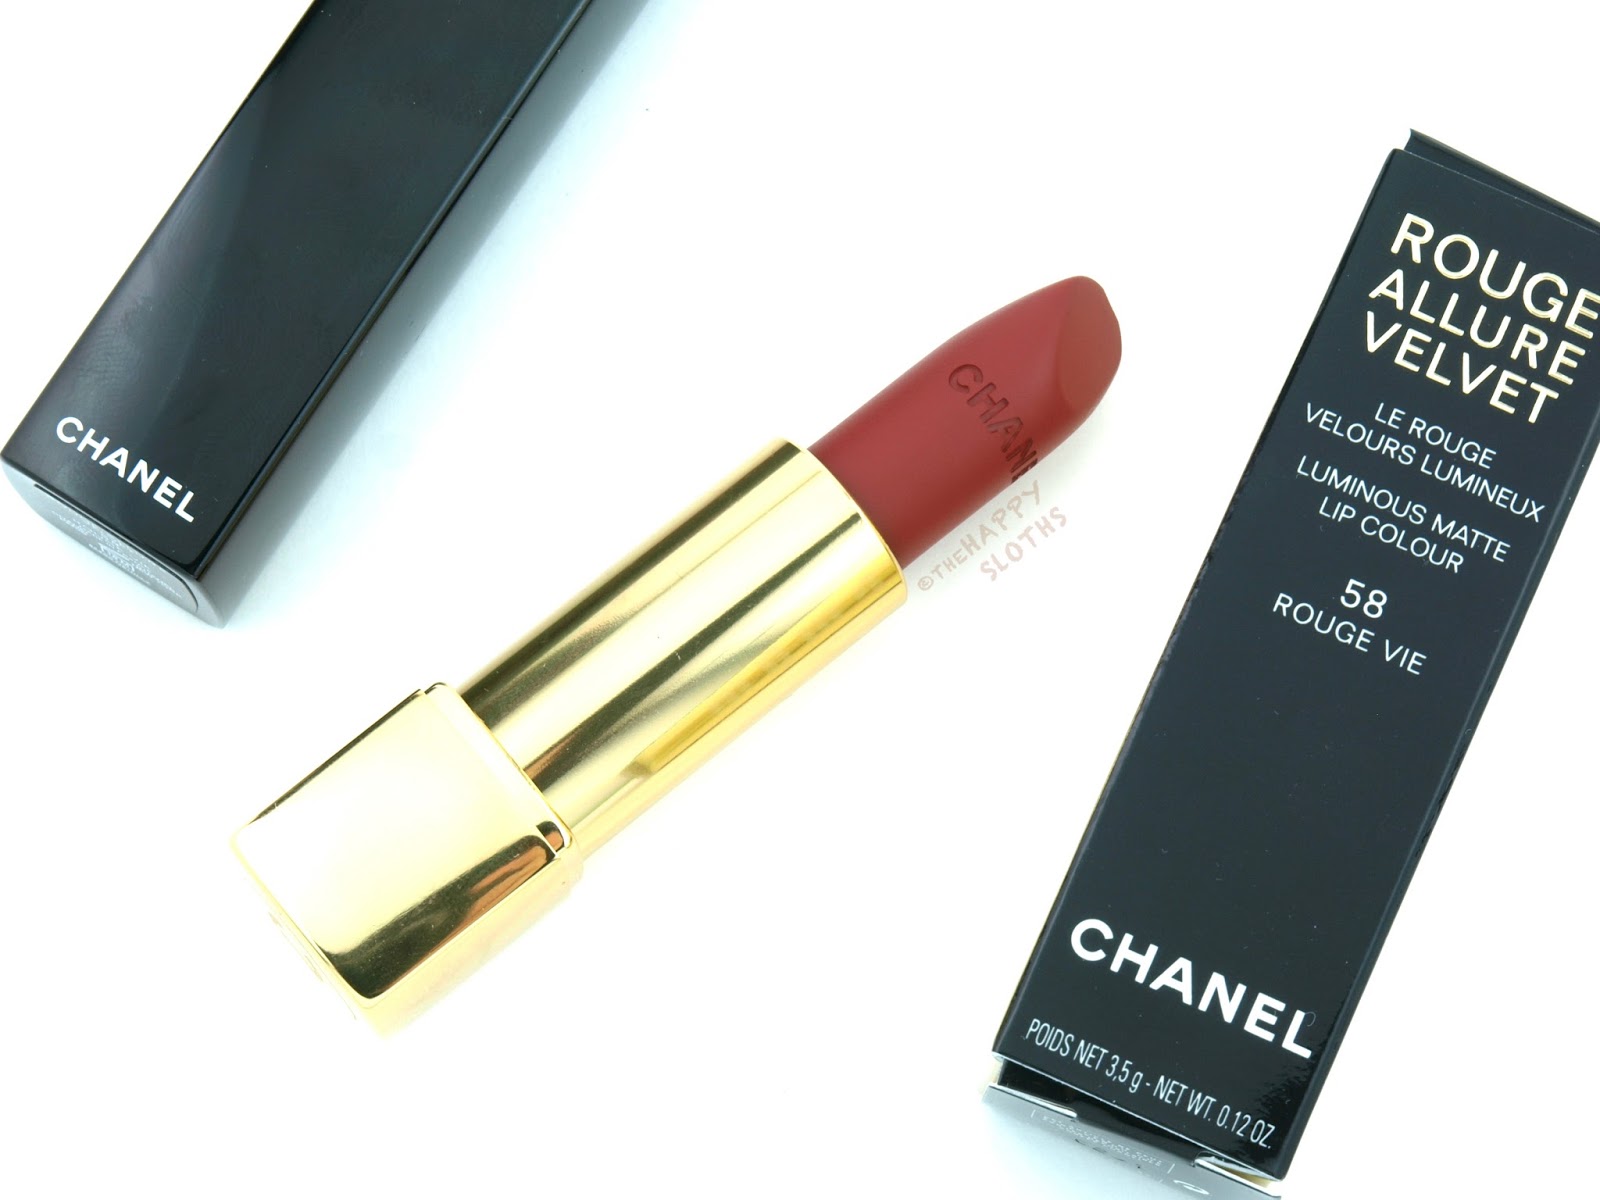 Chanel Fall 2016 Le Rouge N°1 Collection, 58 Rouge Vie Rouge Allure  Velvet Lipstick: Review and Swatches